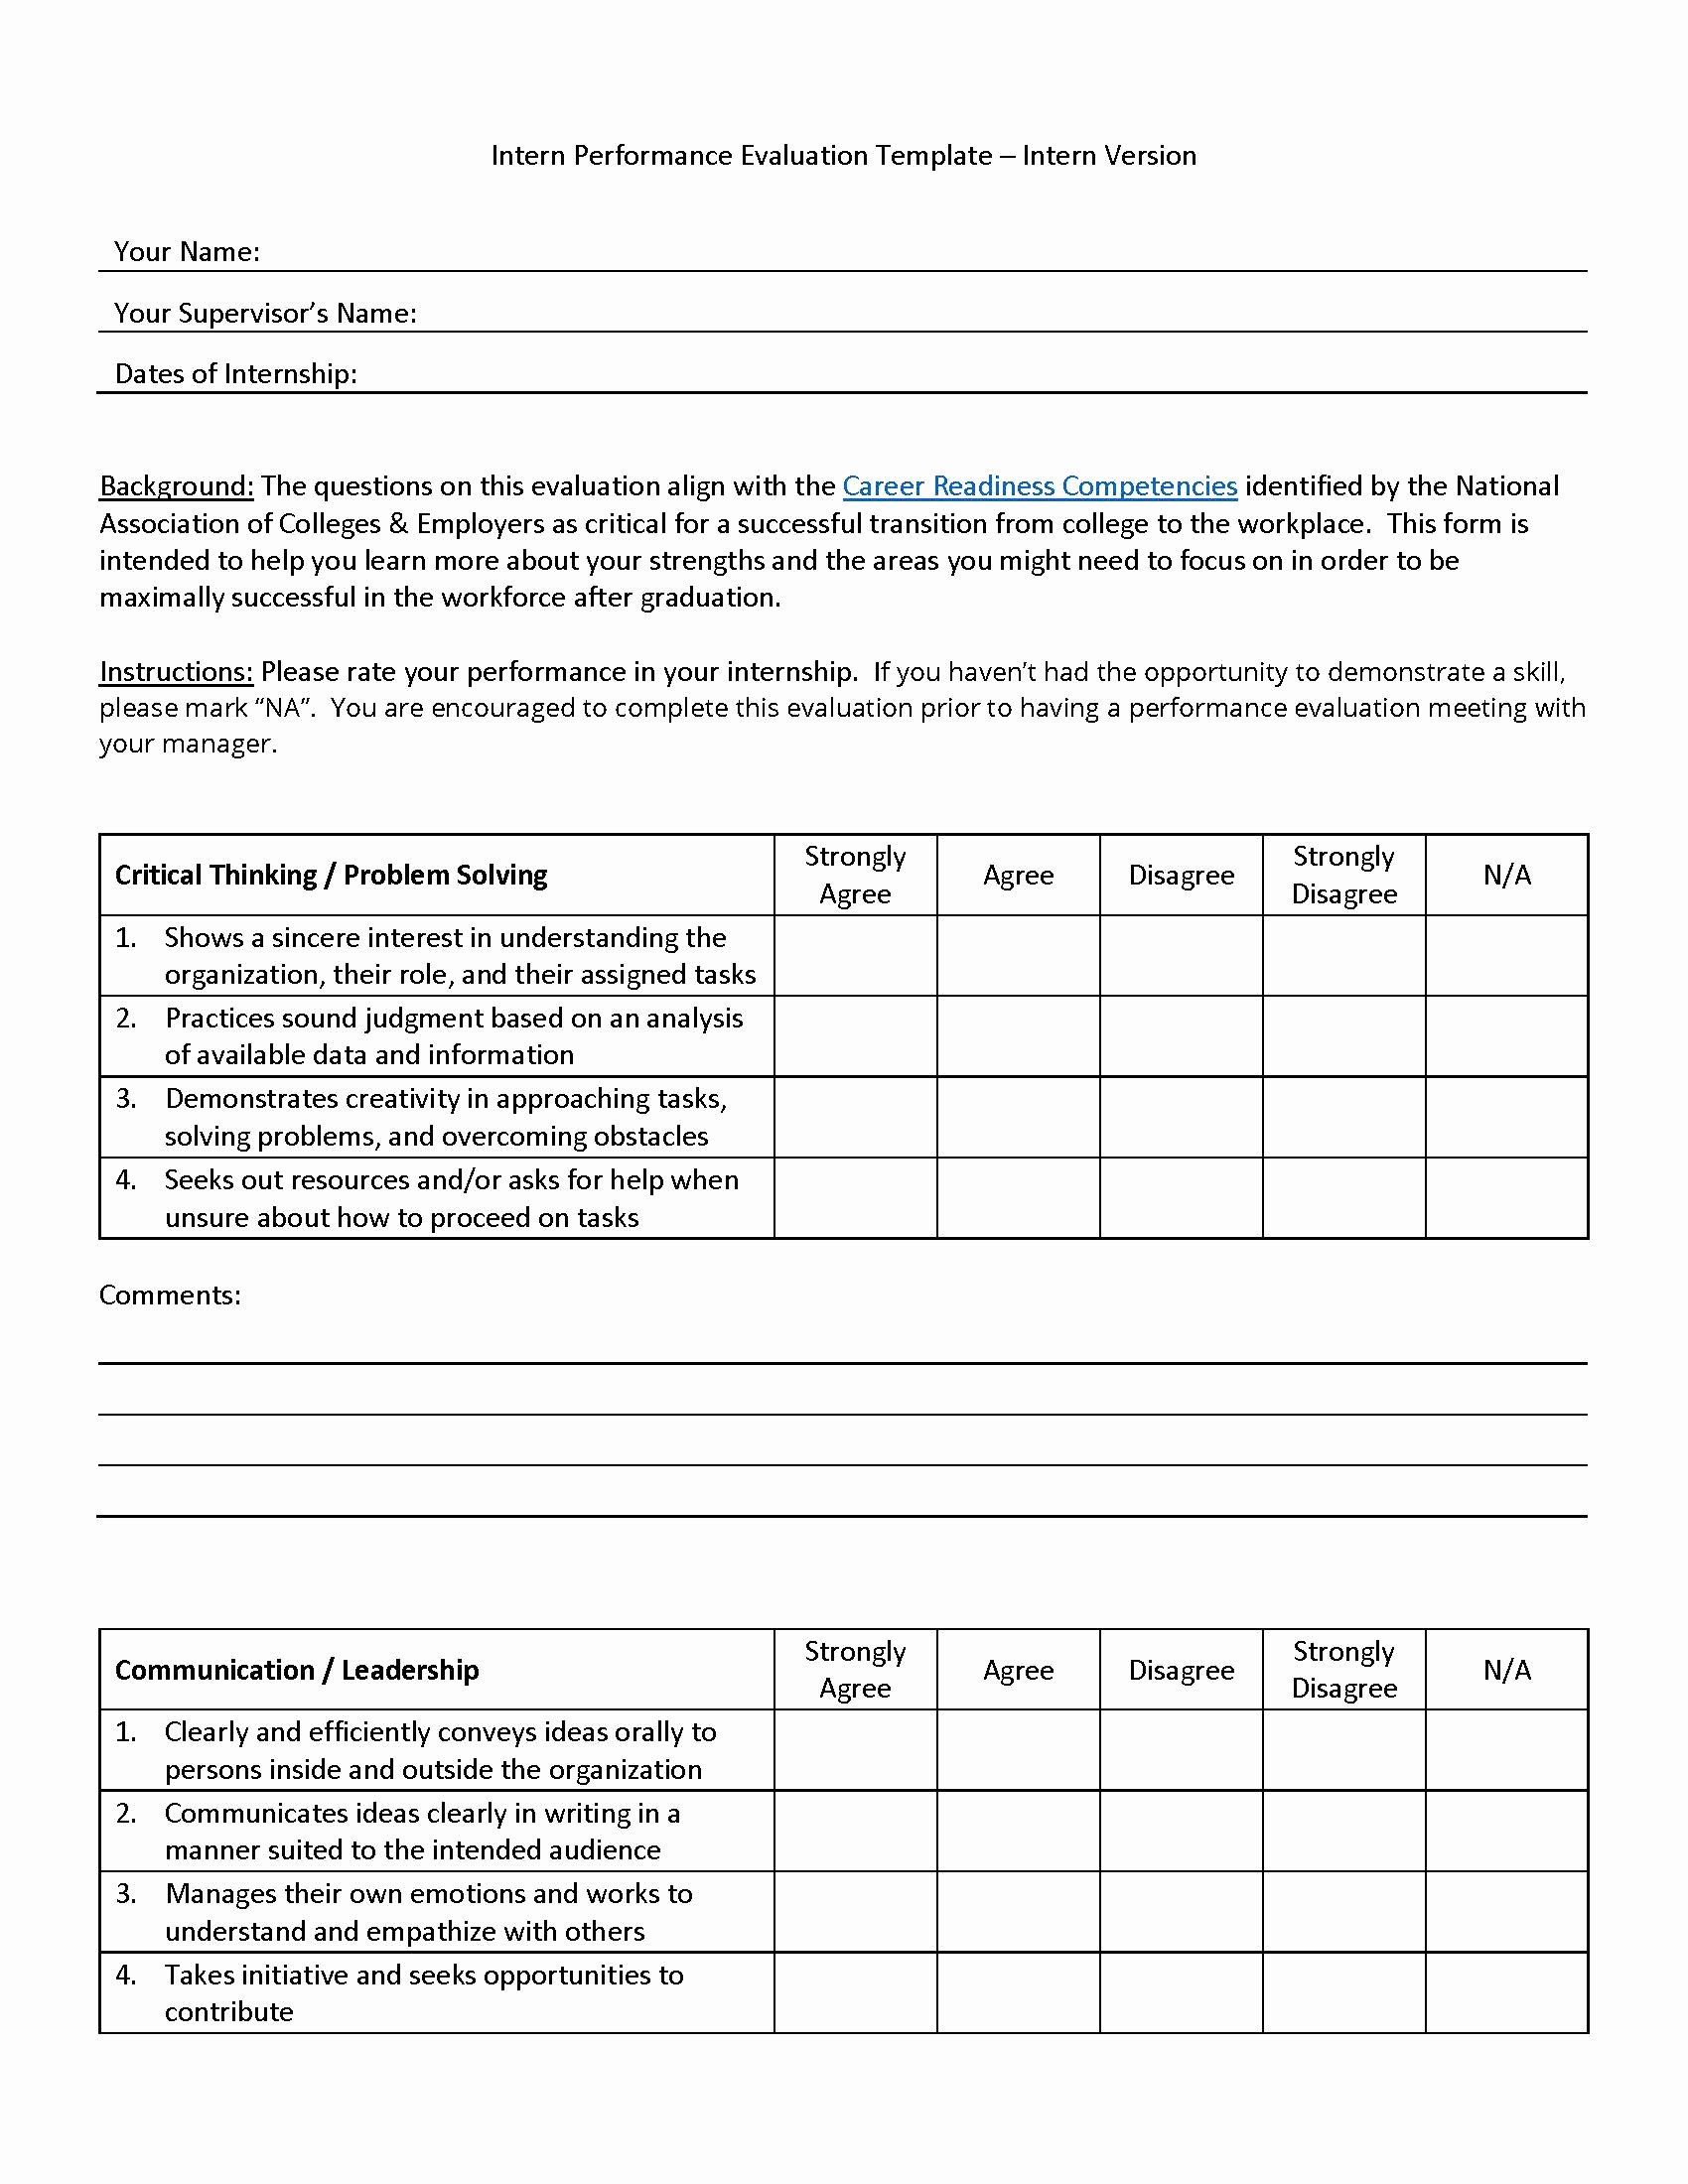 Free Employee Evaluation form Template Awesome Intern Performance Evaluation Template Intern Version